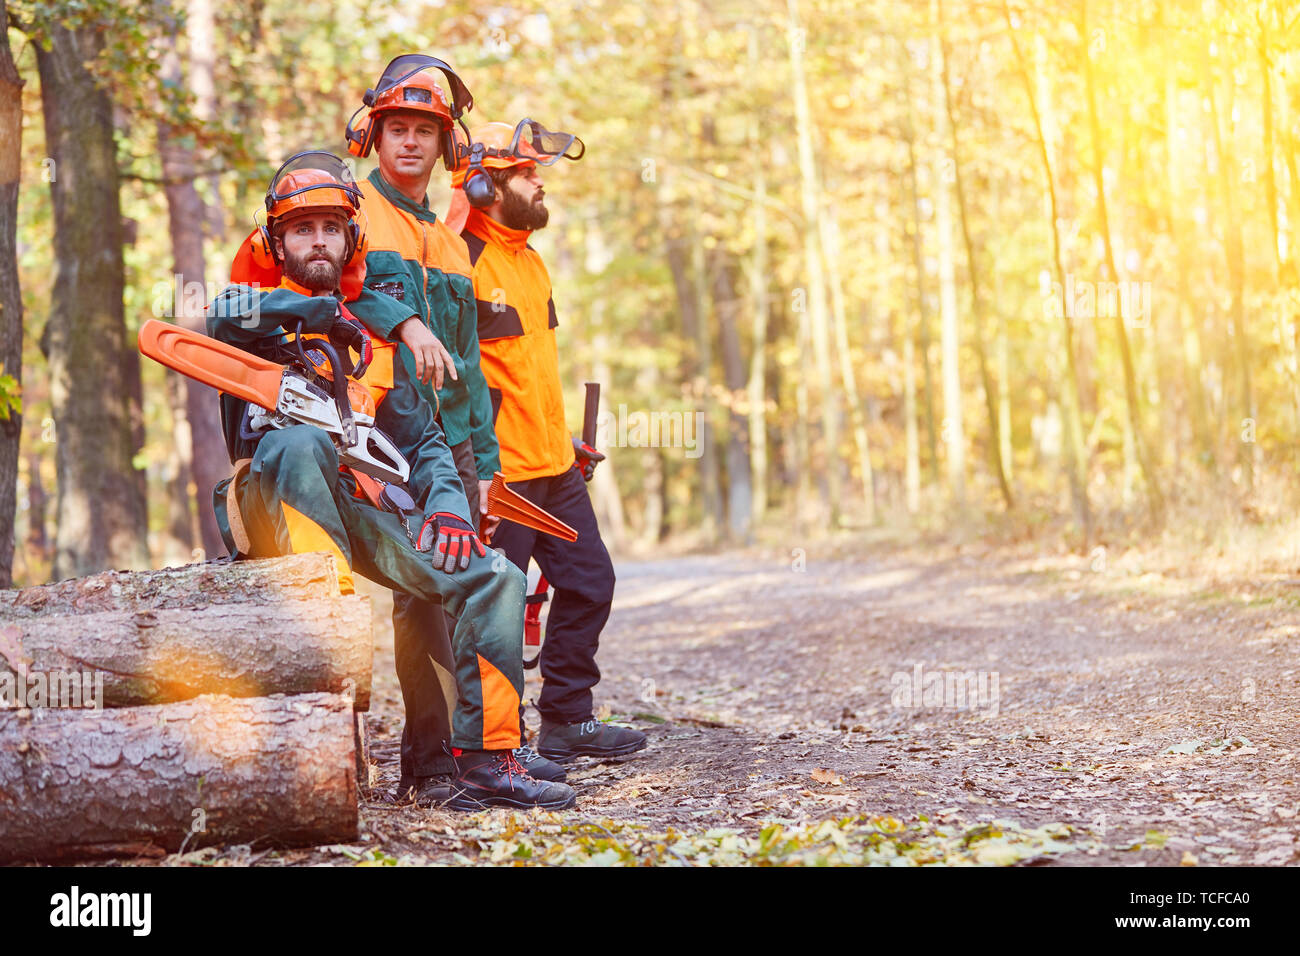 Occupational safety and protective clothing for lumberjacks and forest workers in the forest Stock Photo